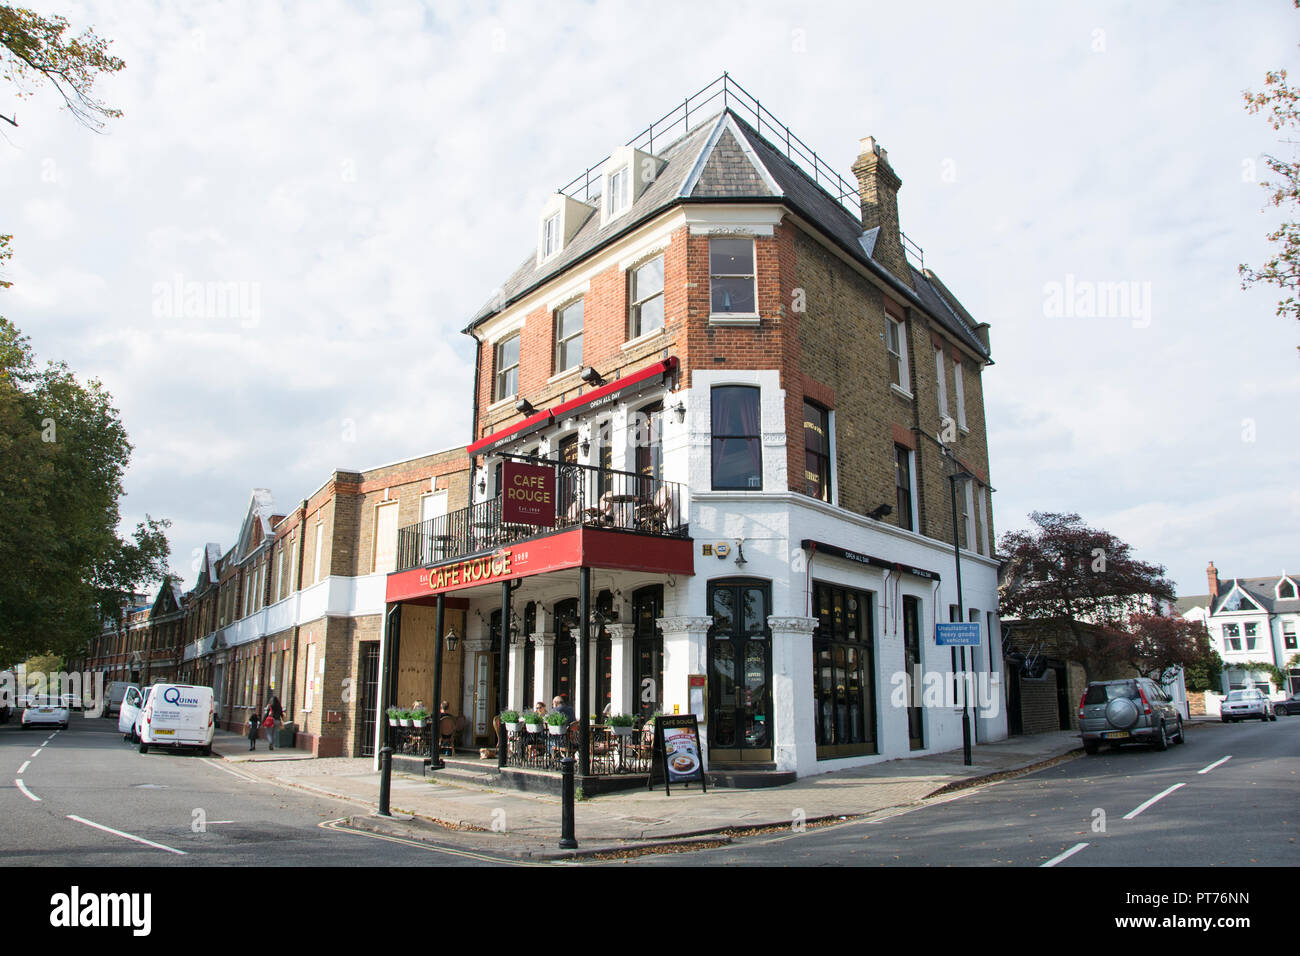 The former Cafe Rouge, Strand-On-The-Green, Chiswick, London, UK Stock Photo